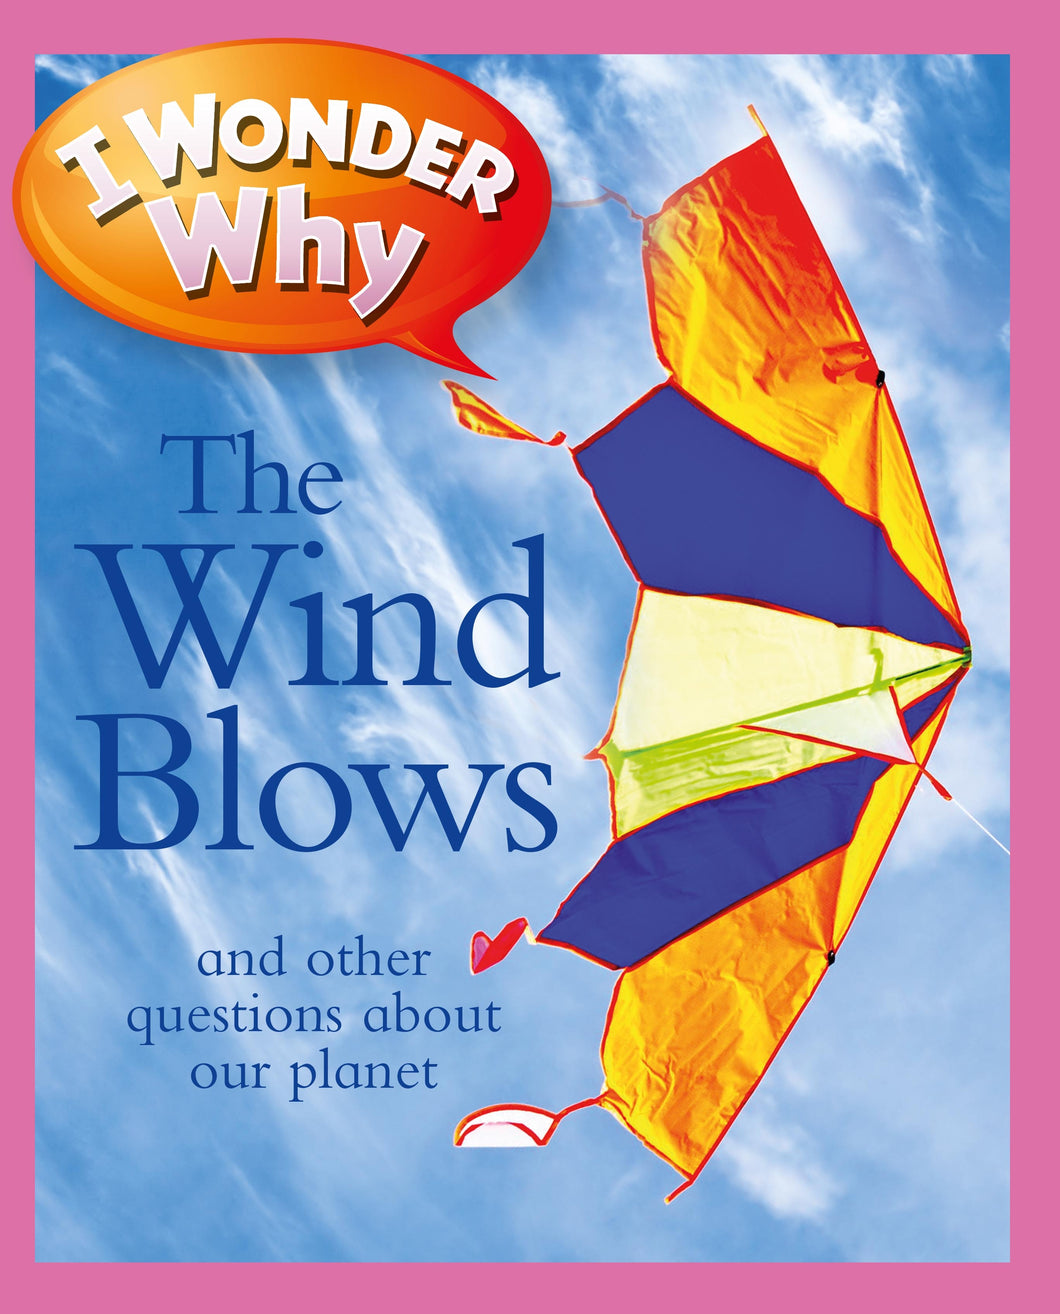 I Wonder Why: The Wind Blows and other questions about our planet